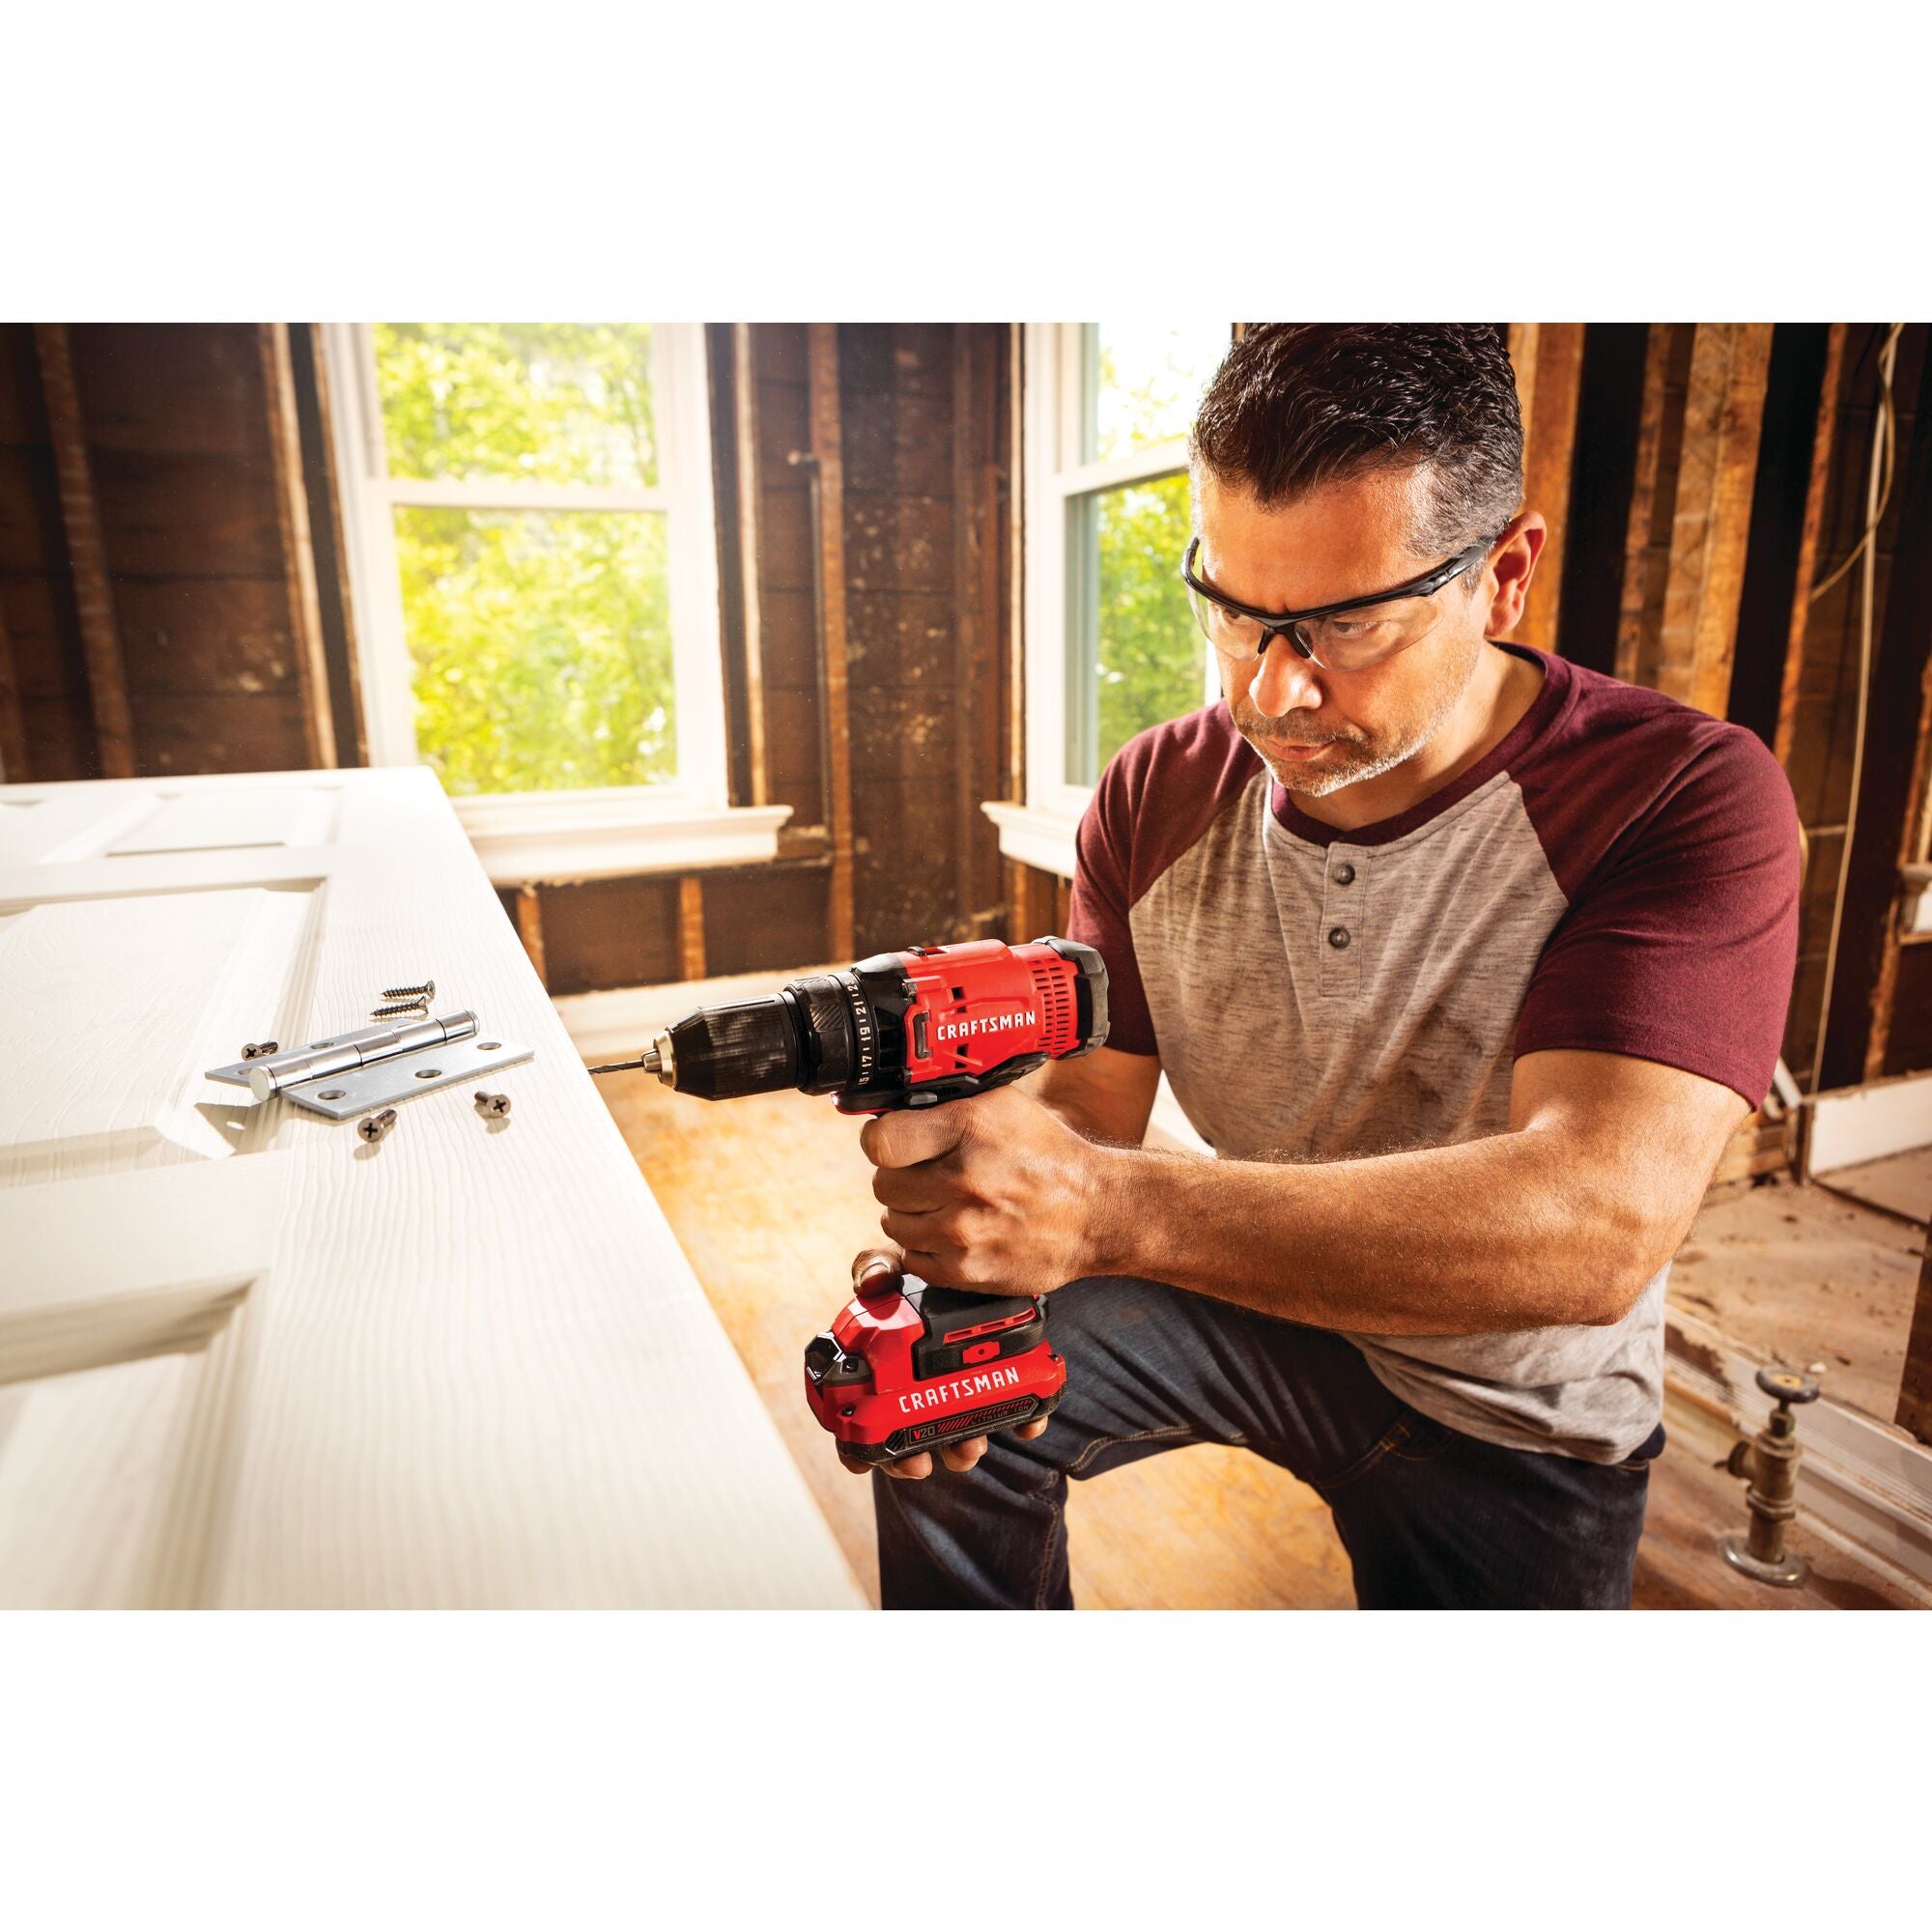  BLACK+DECKER 6.0 Amp 3/8 in. Electric Drill/Driver Kit